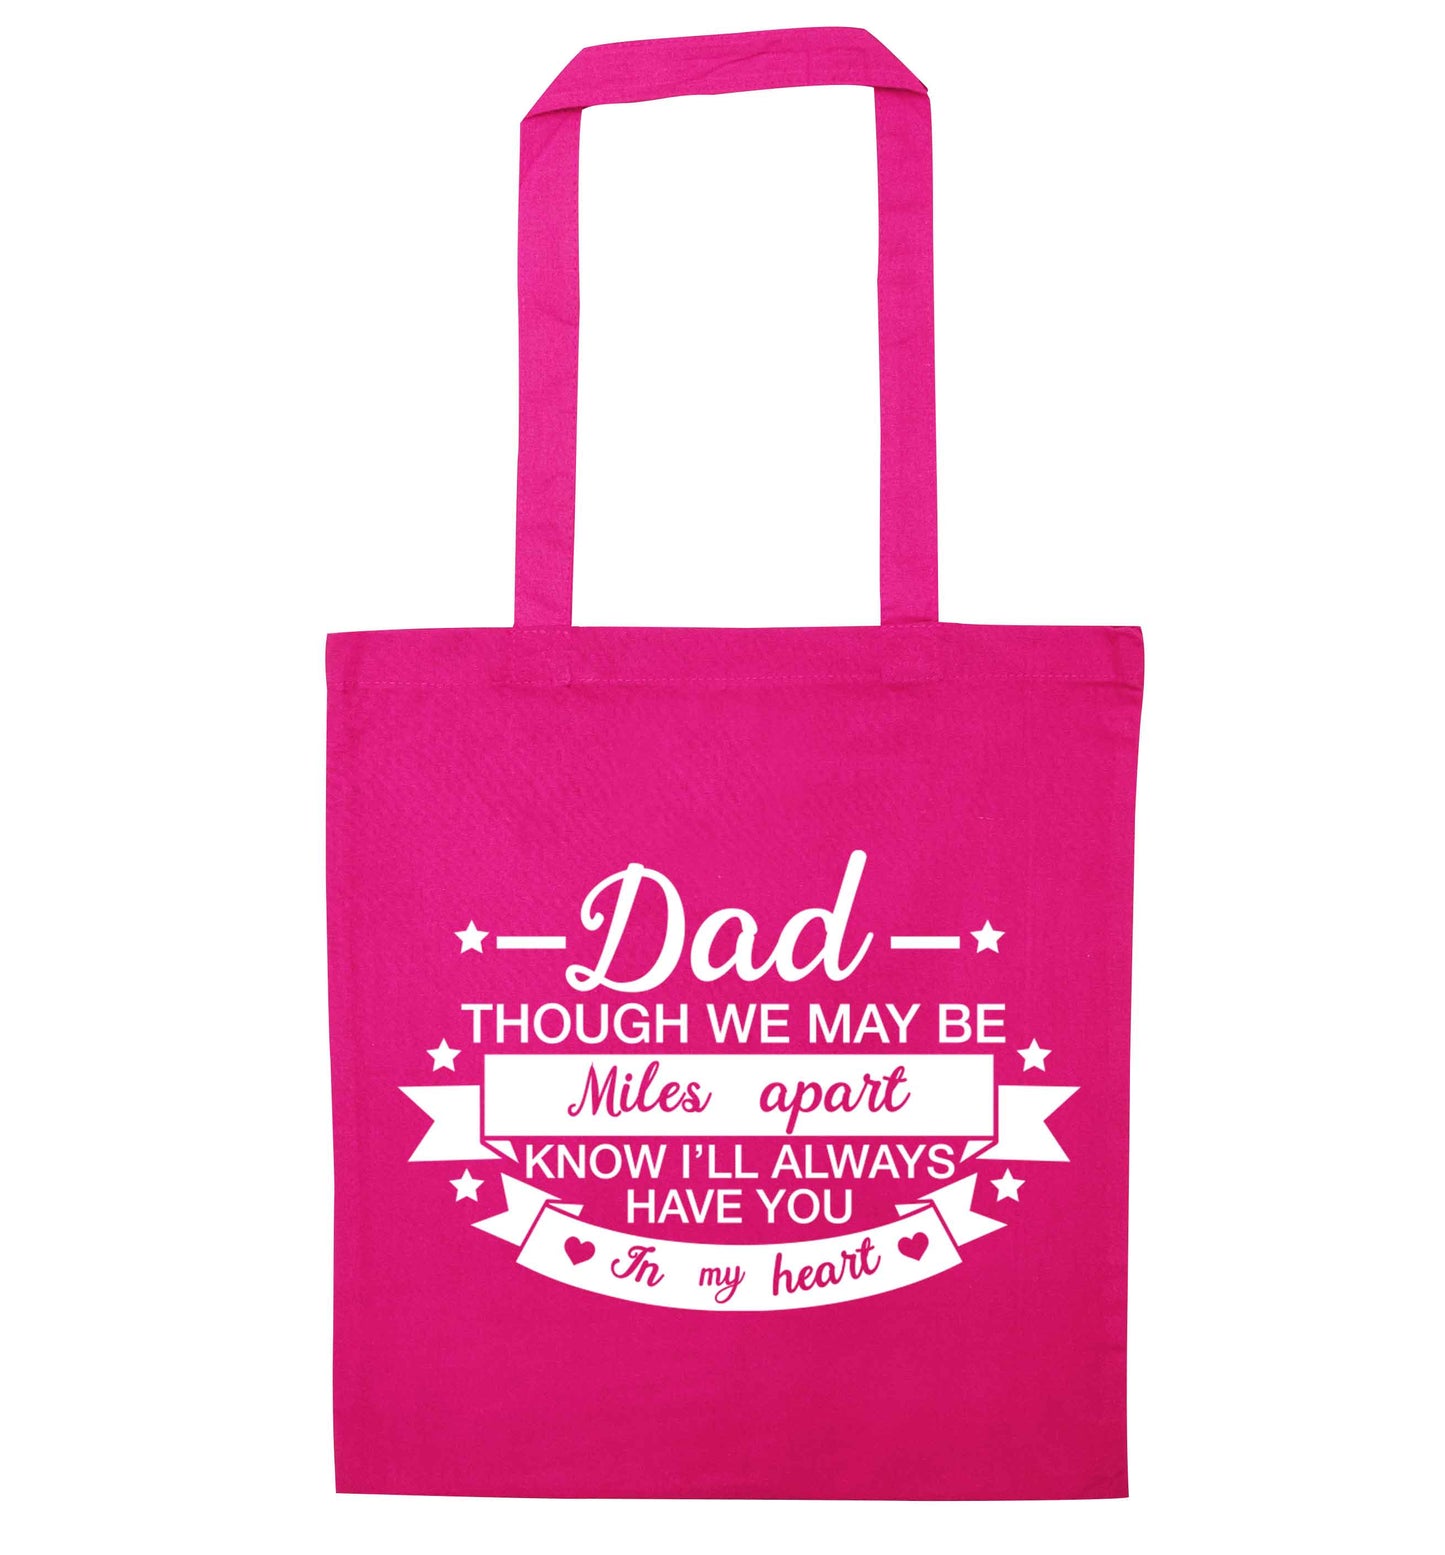 Dad though we are miles apart know I'll always have you in my heart pink tote bag